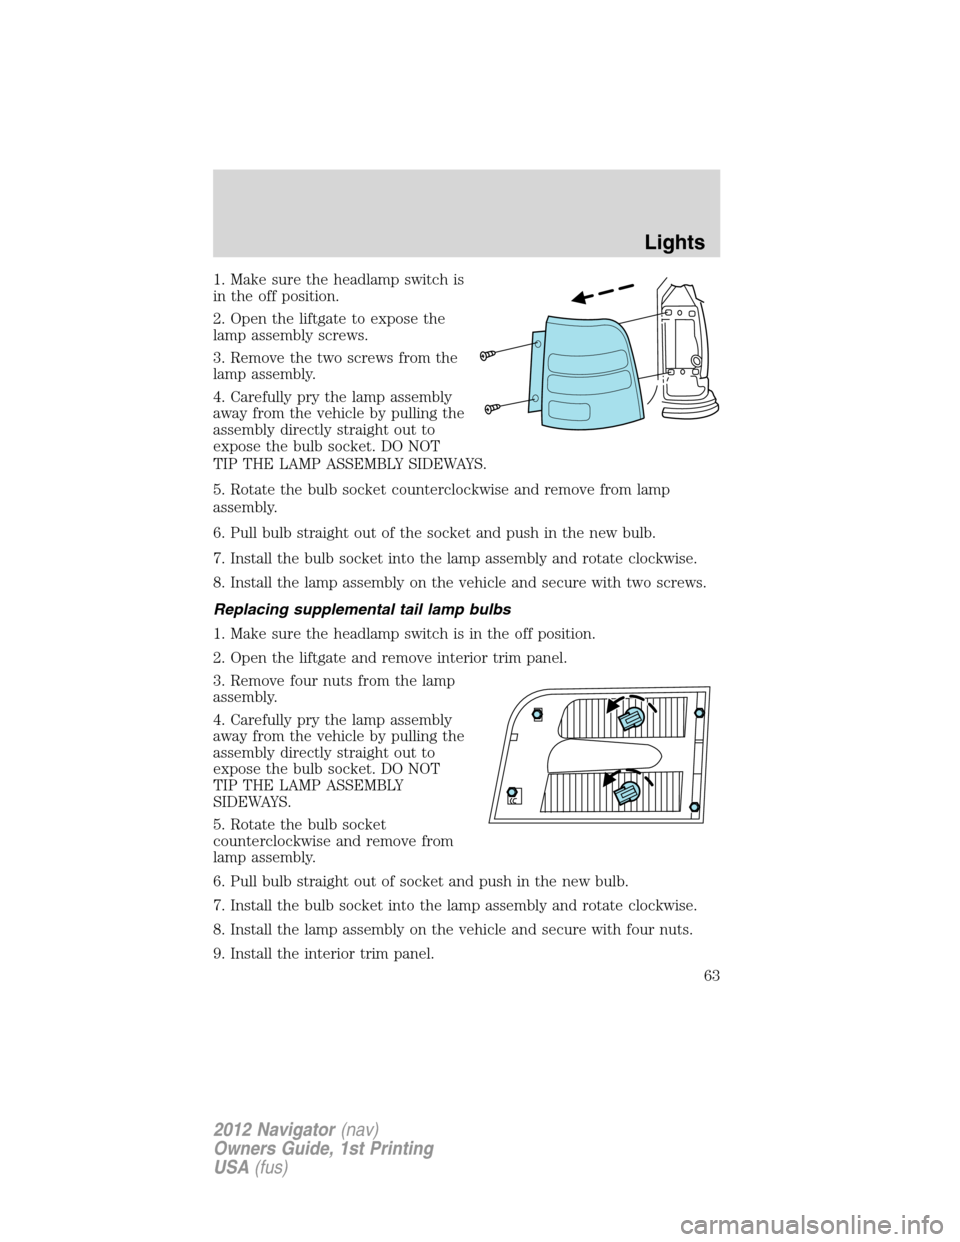 LINCOLN NAVIGATOR 2012  Navigation Manual 1. Make sure the headlamp switch is
in the off position.
2. Open the liftgate to expose the
lamp assembly screws.
3. Remove the two screws from the
lamp assembly.
4. Carefully pry the lamp assembly
aw